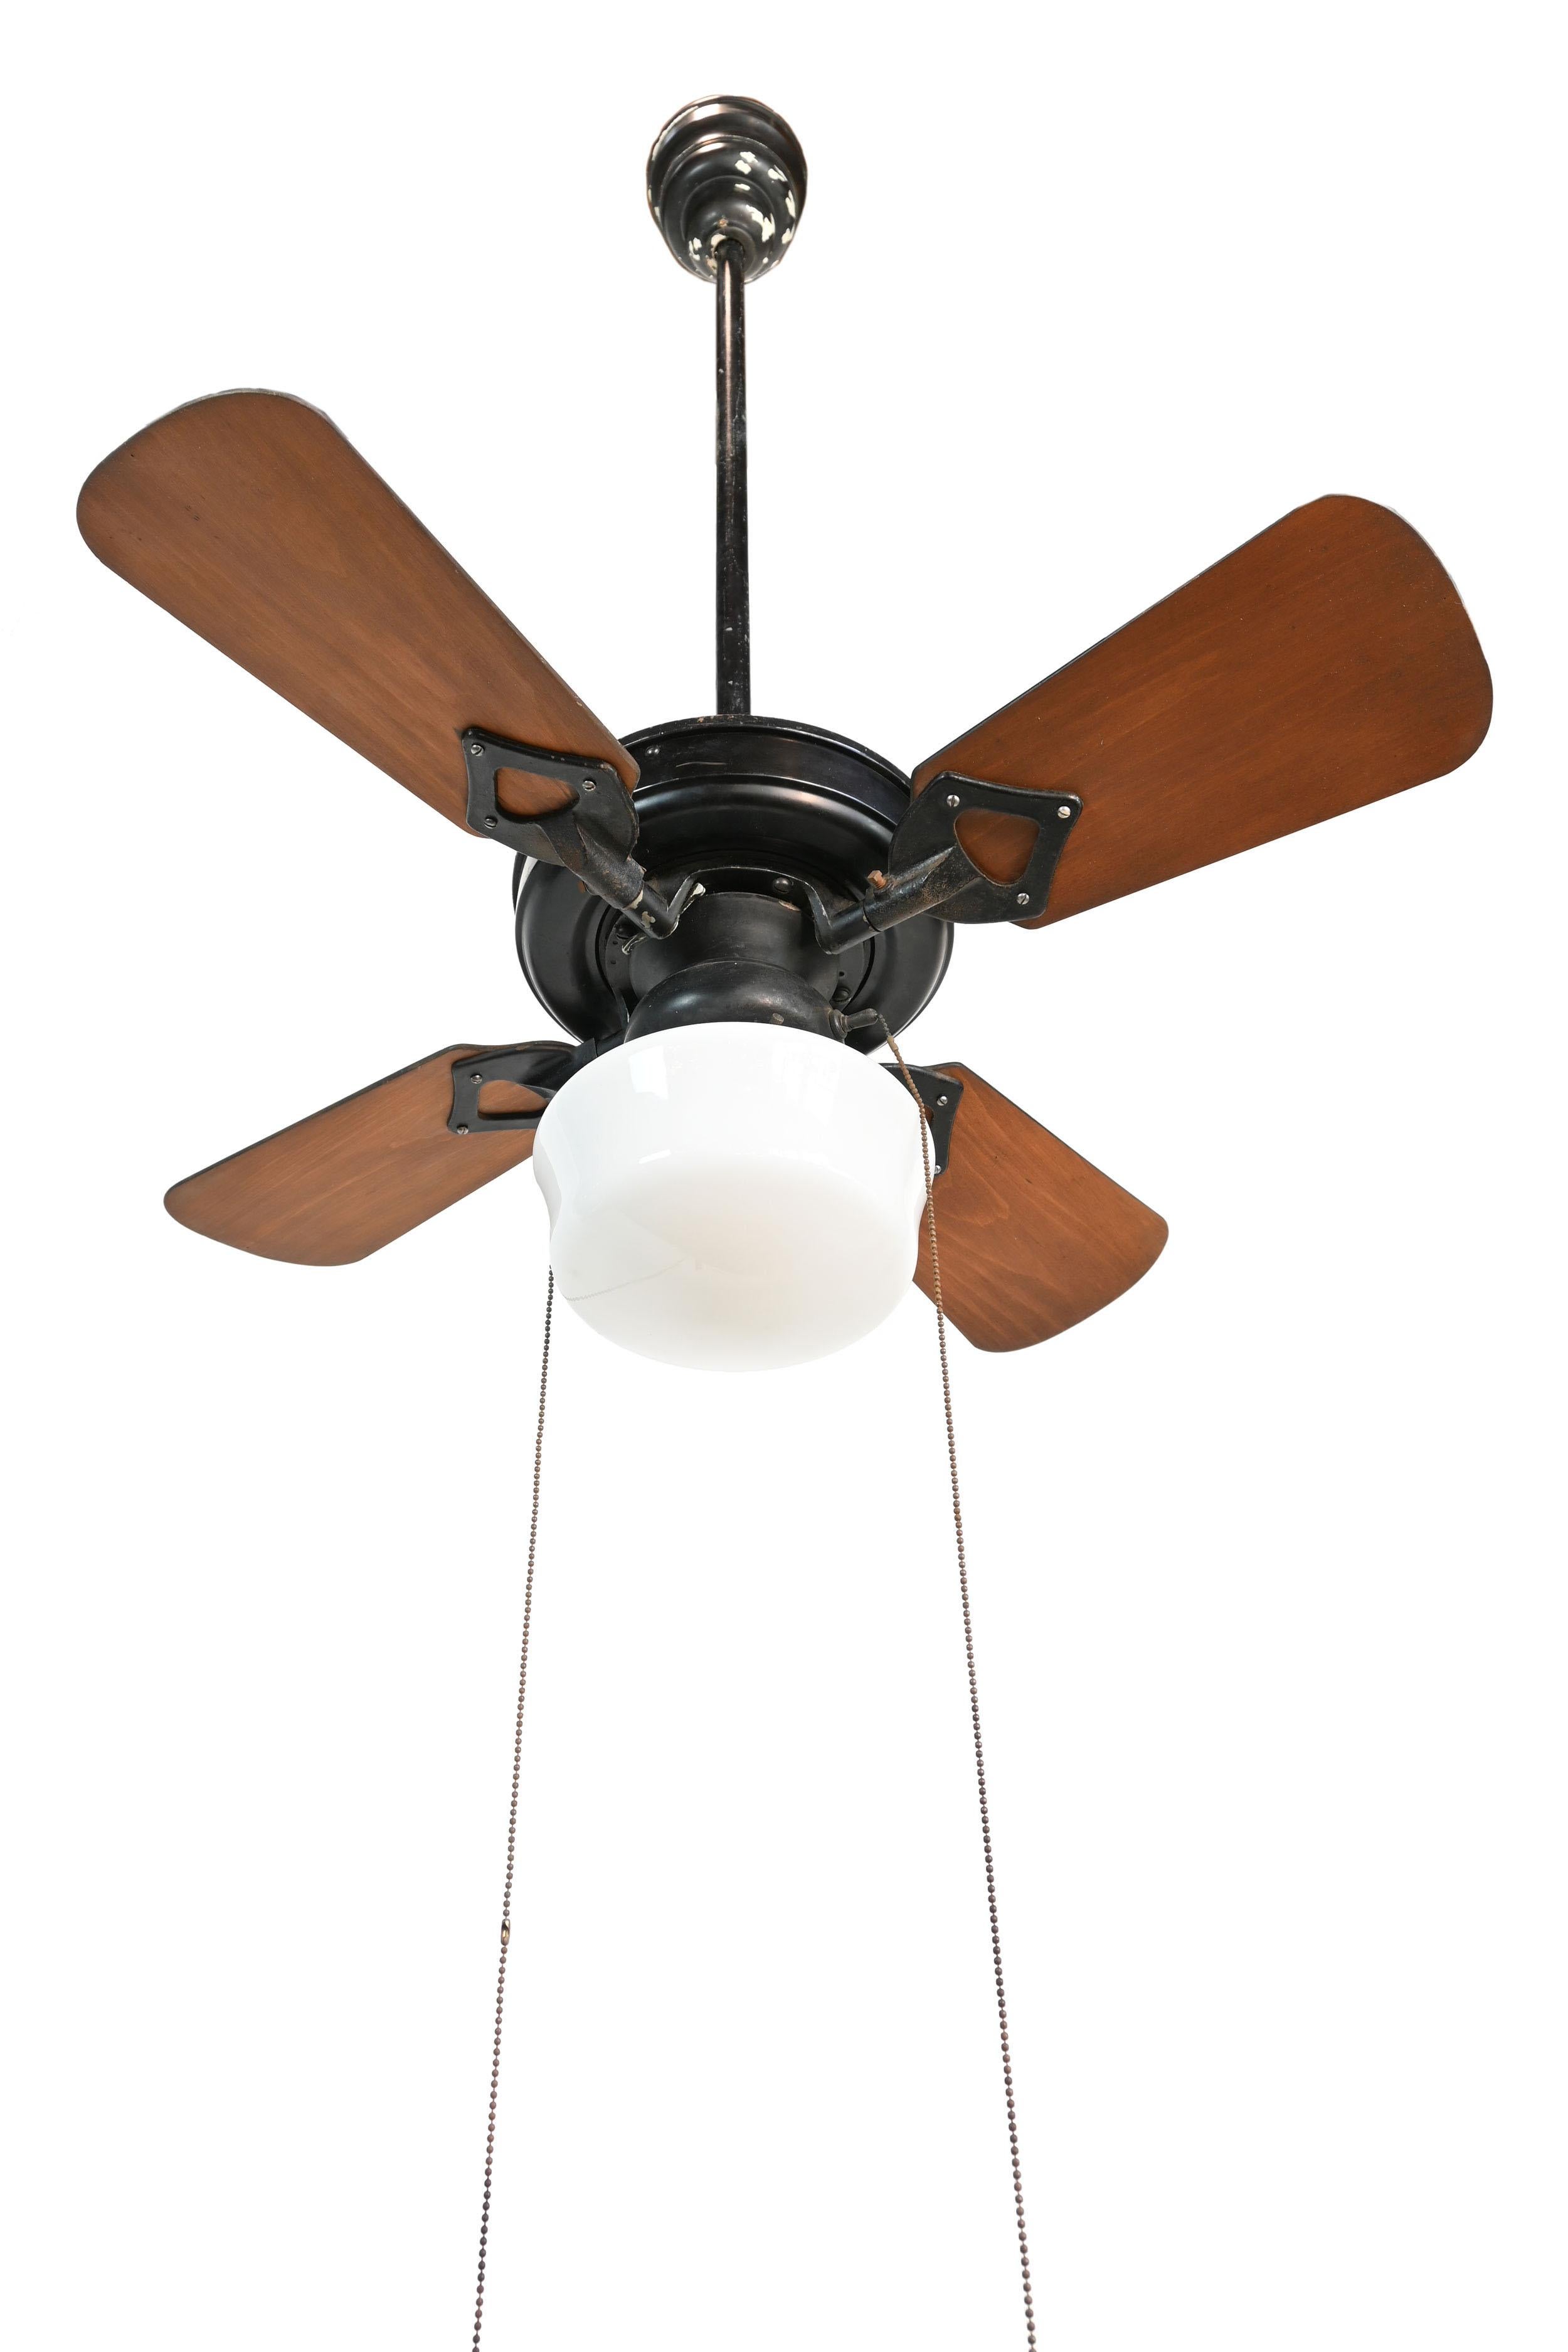 North American Westinghouse Ceiling Fan with Schoolhouse Shade